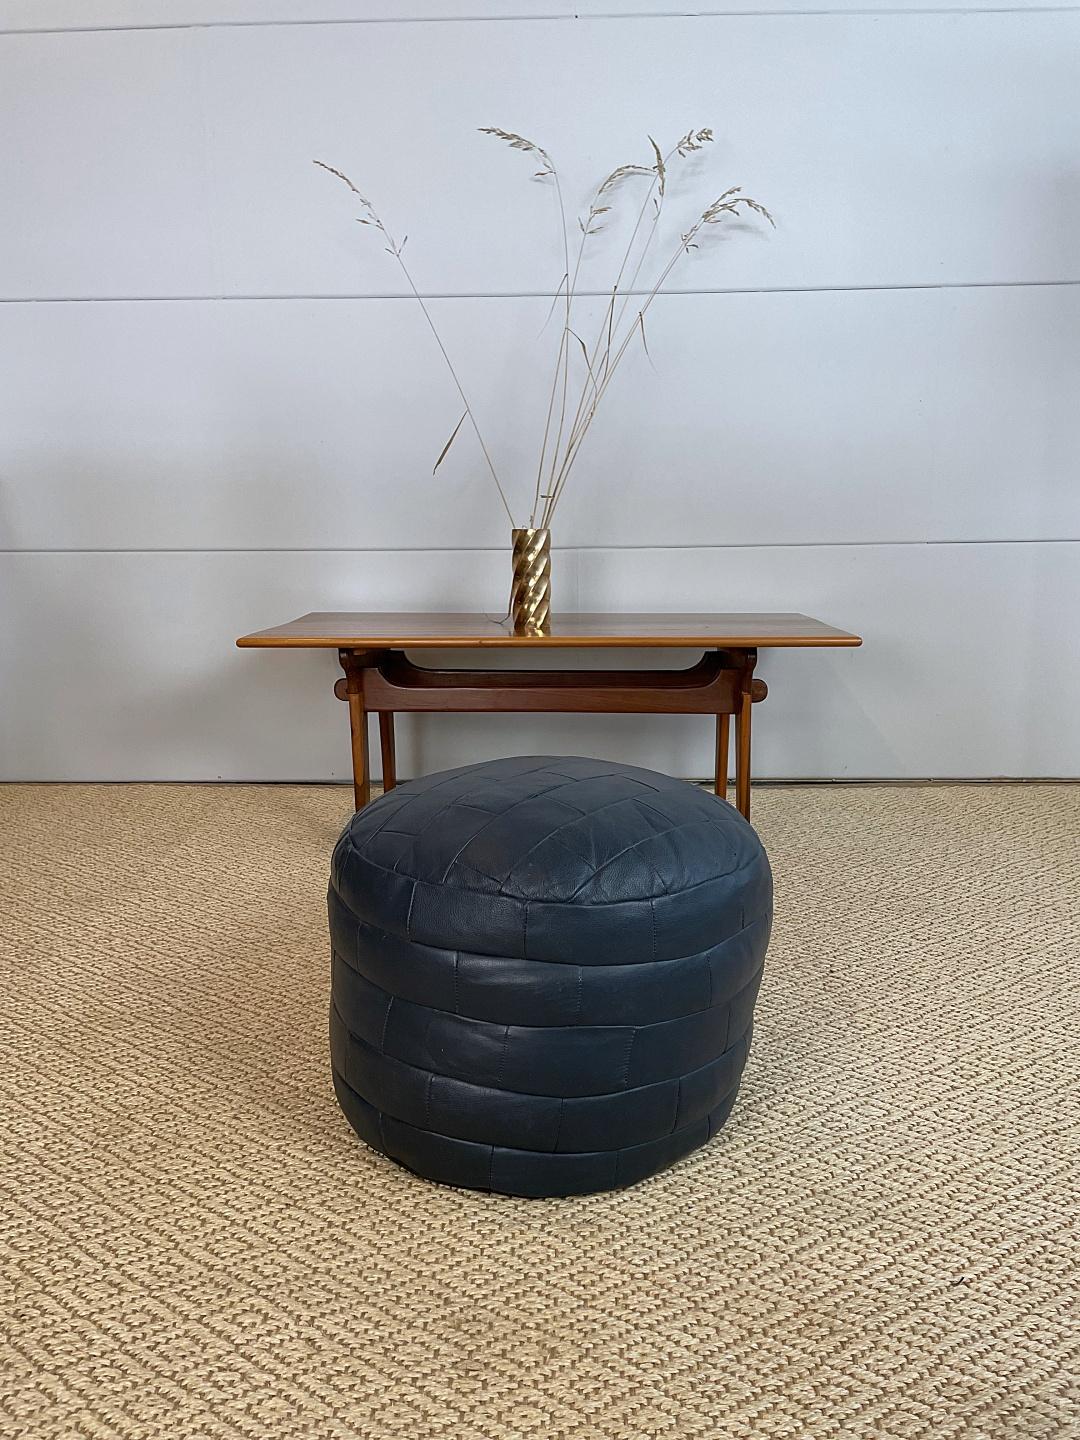 Unique and decorative handmade De Sede DS-80 pouf. The pouf is in very good condition with lovely patina, high seating comfort.

Detailed condition: Very good, this vintage item has no defects, but it may show slight traces of use.

We ship via